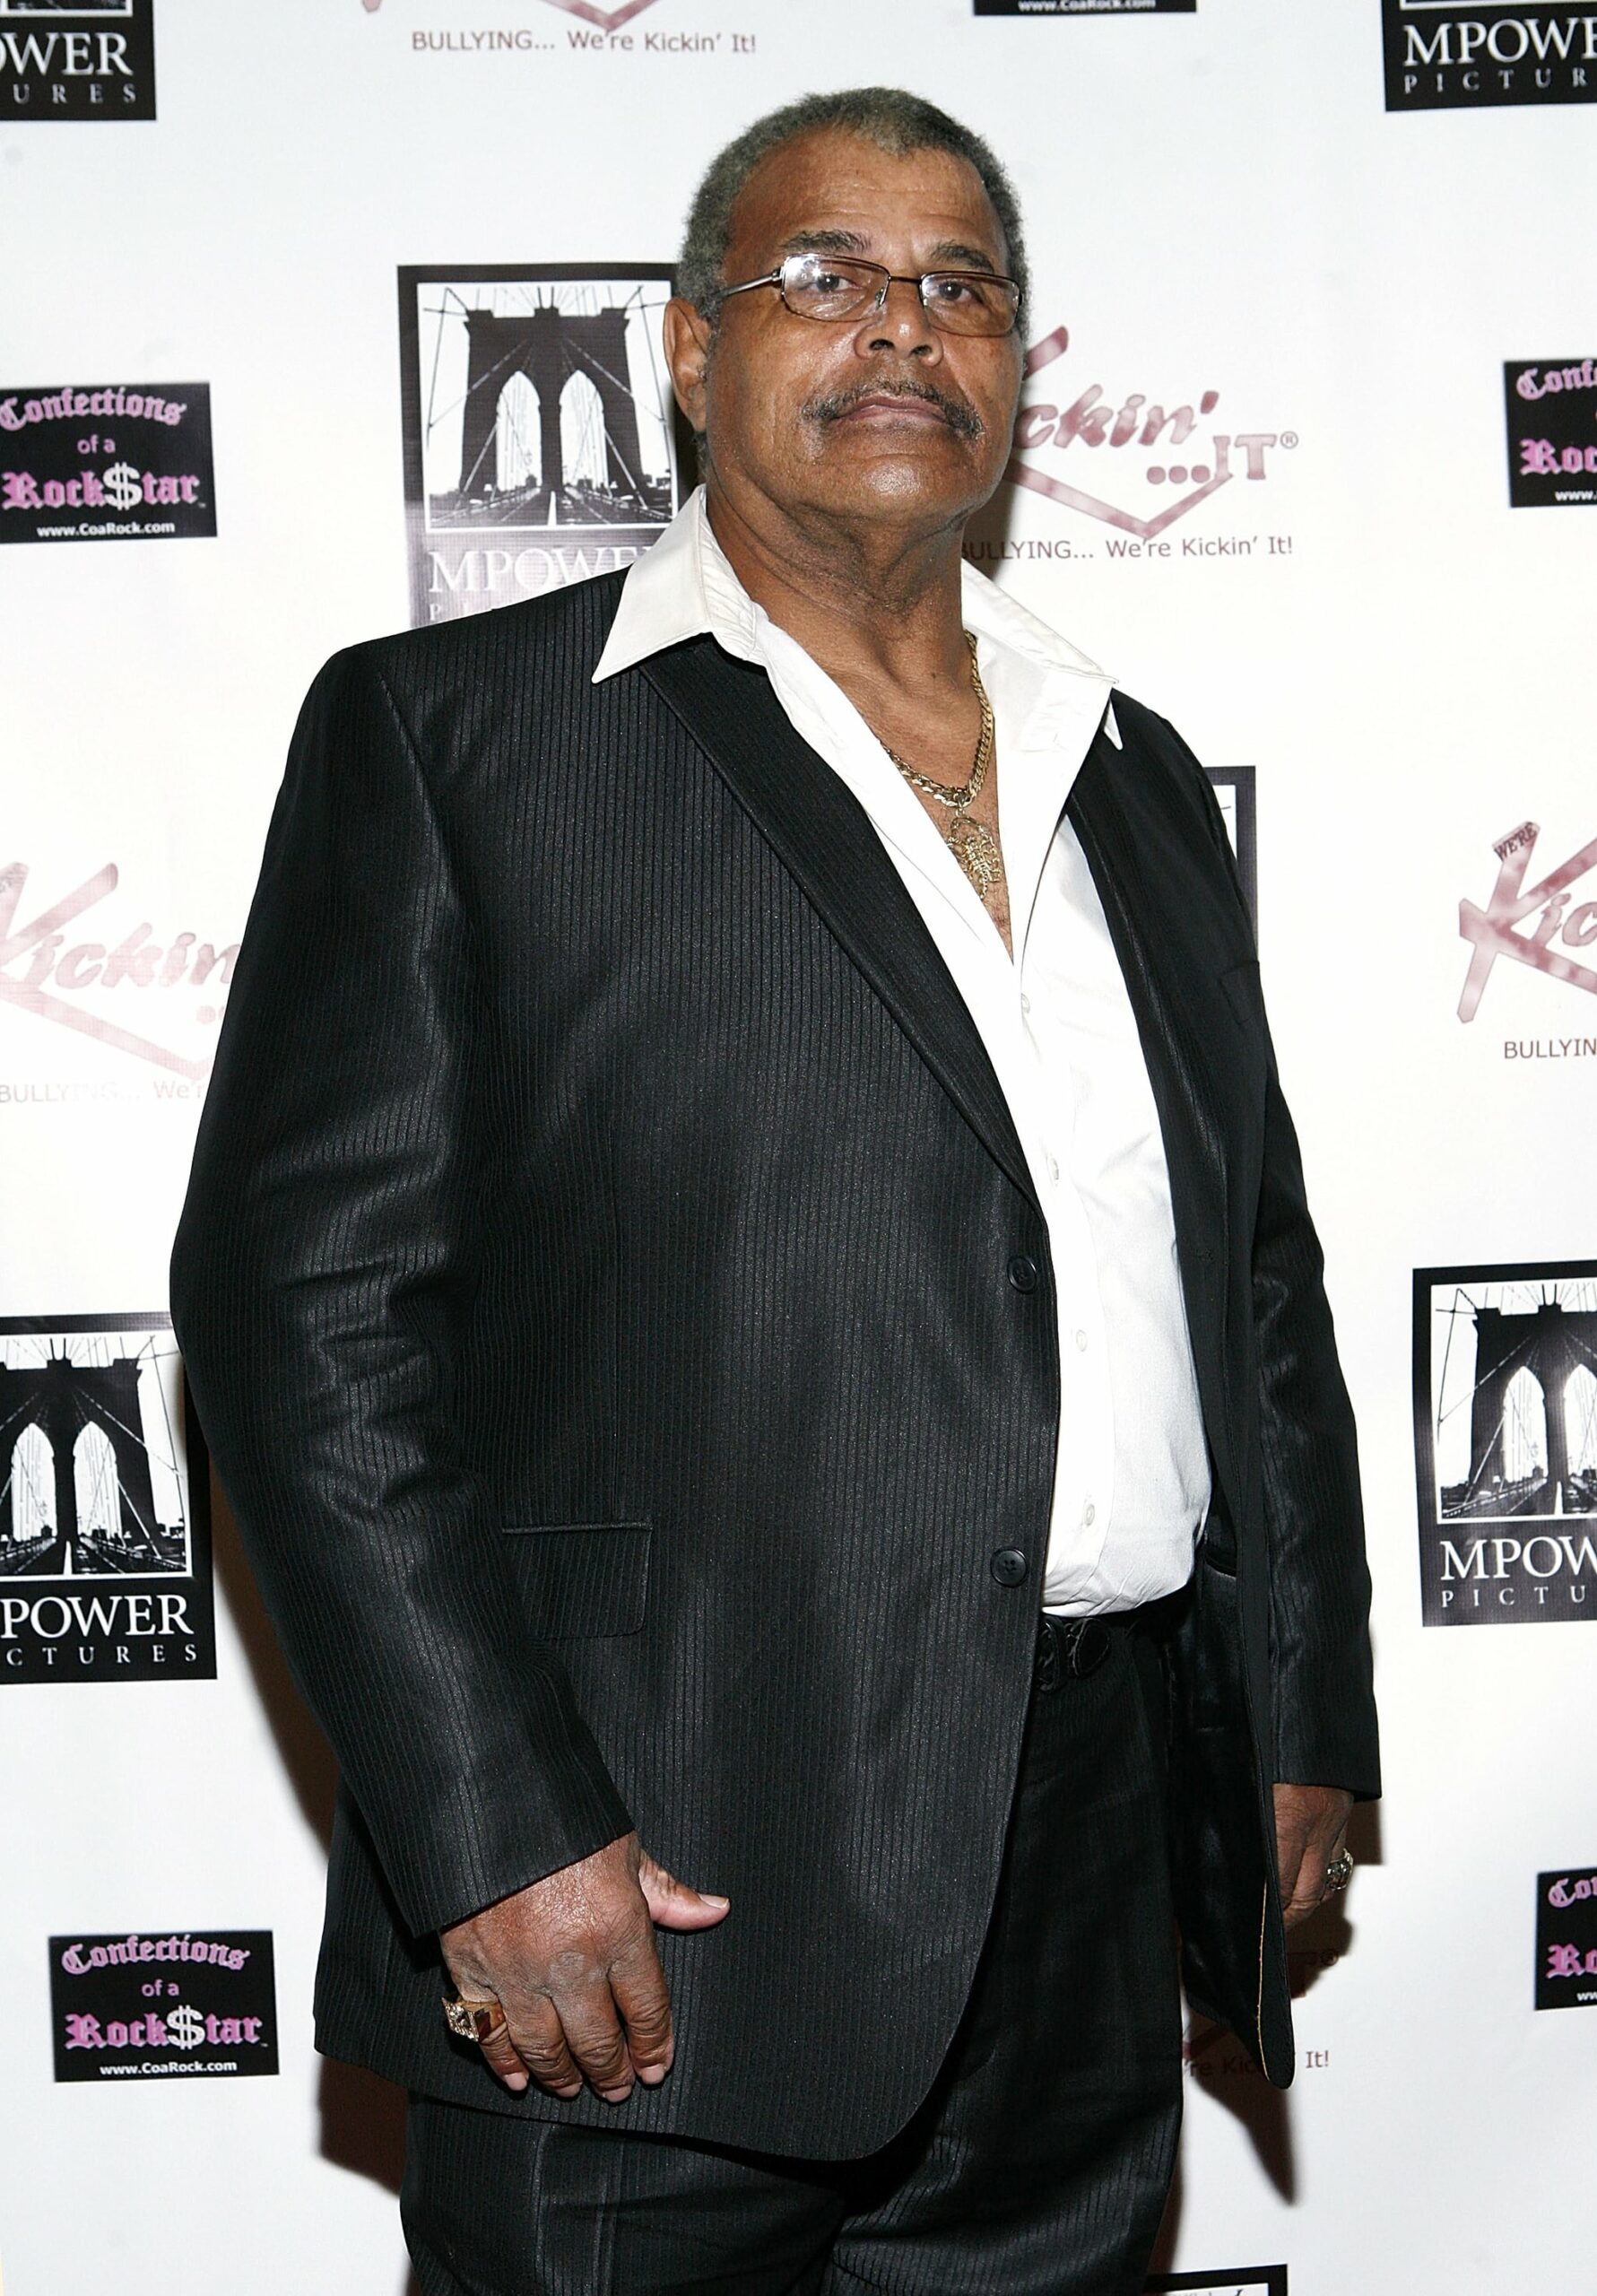 NEW YORK, NY - OCTOBER 20:  Rocky Johnson attends Unite in the Fight... to Knockout Bullying at the Hard Rock Cafe New York on October 20, 2011 in New York City.  (Photo by John Lamparski/WireImage)